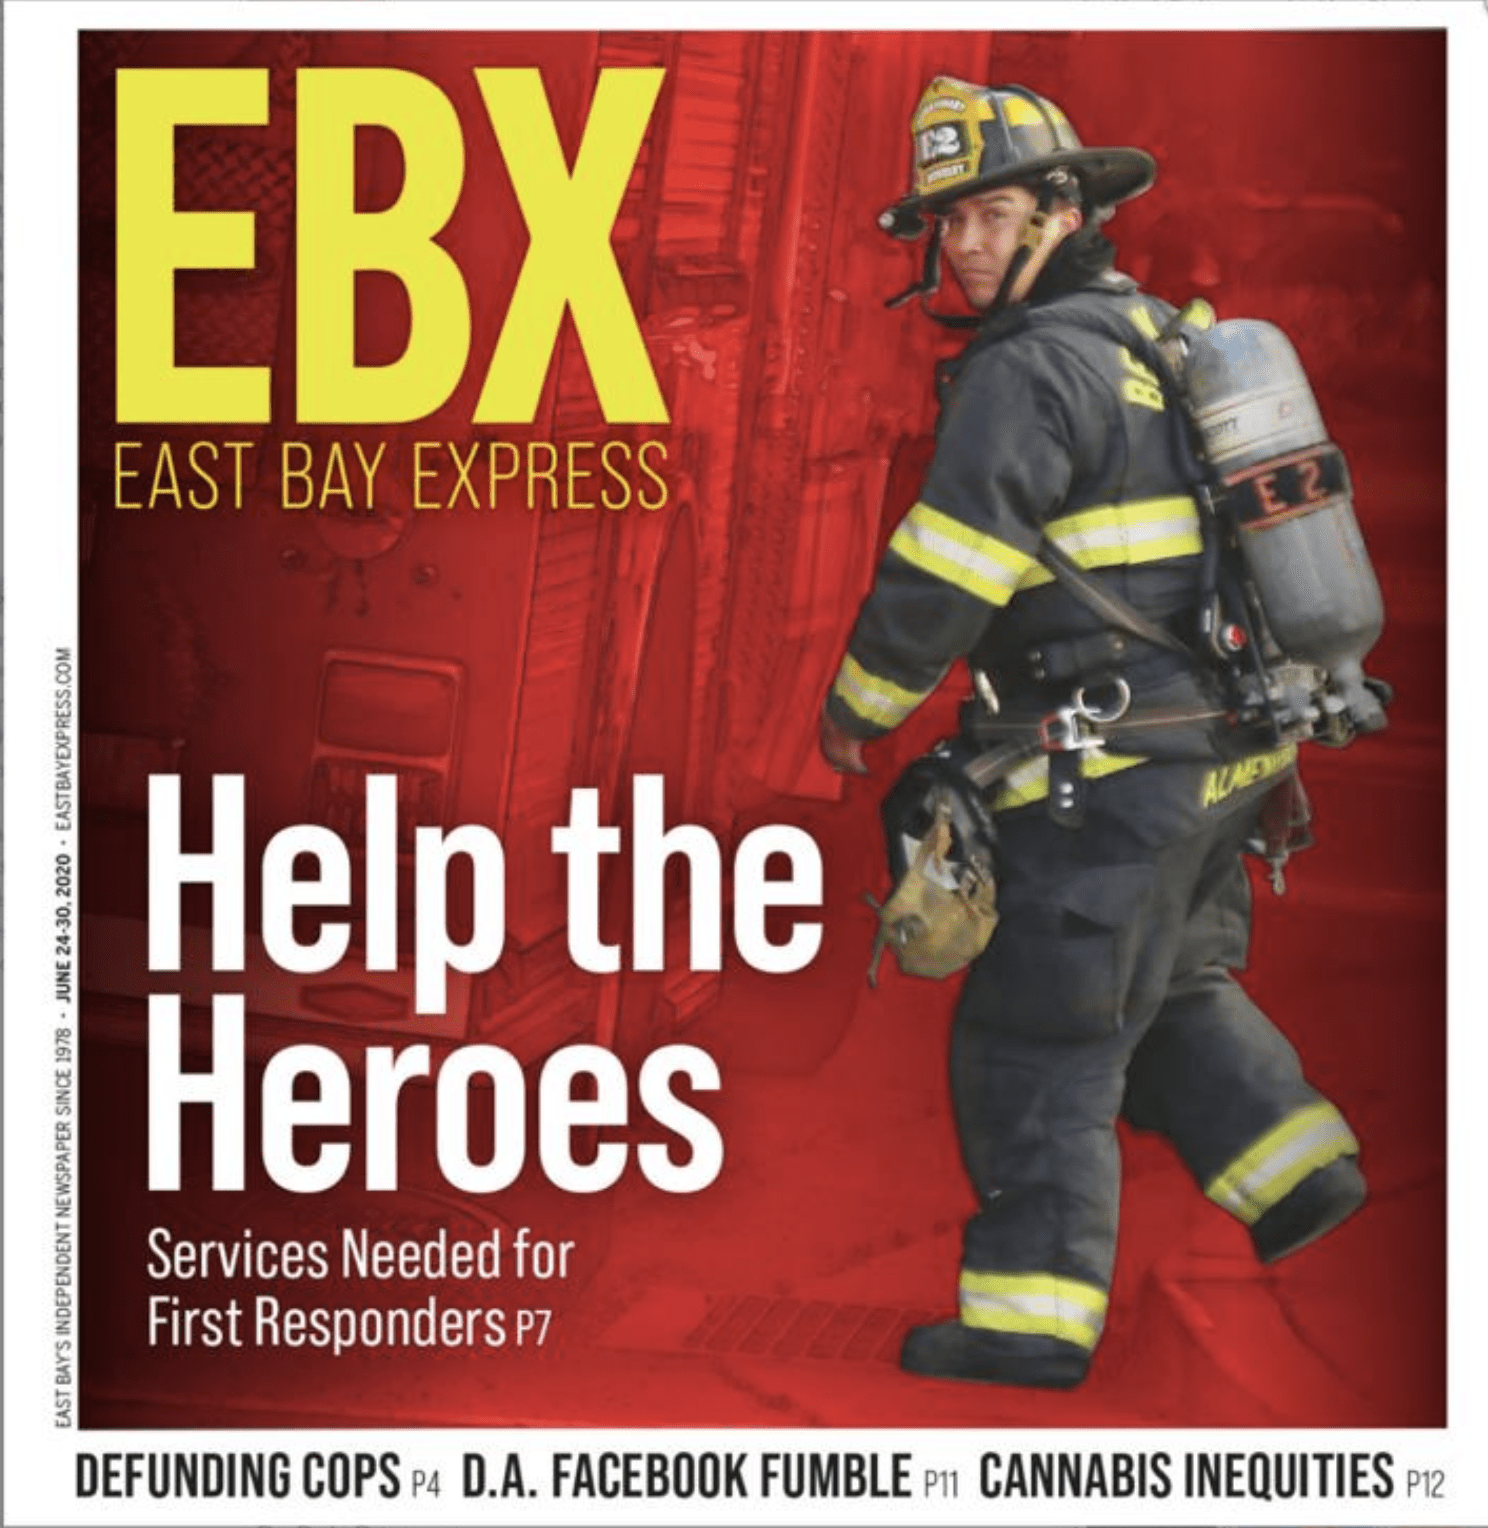 The cover of East Bay Express, with input from Berkeley Journalism, features a firefighter in full gear looking backward. The headline reads 